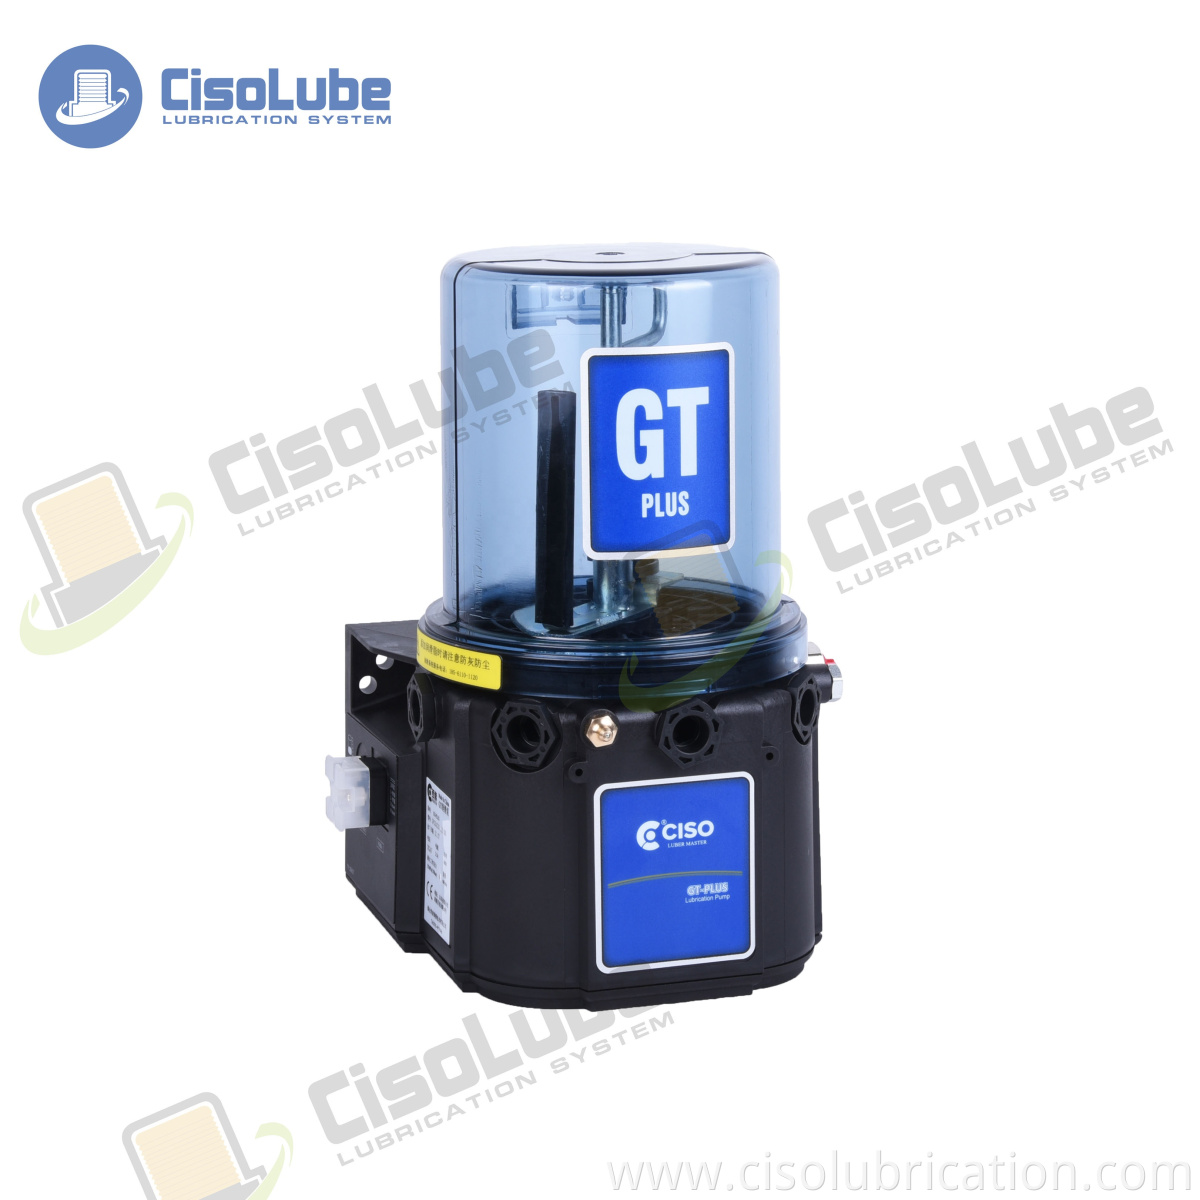 Ciso factory sells CHINA GT-PLUS type automatic grease lubrication electric pump